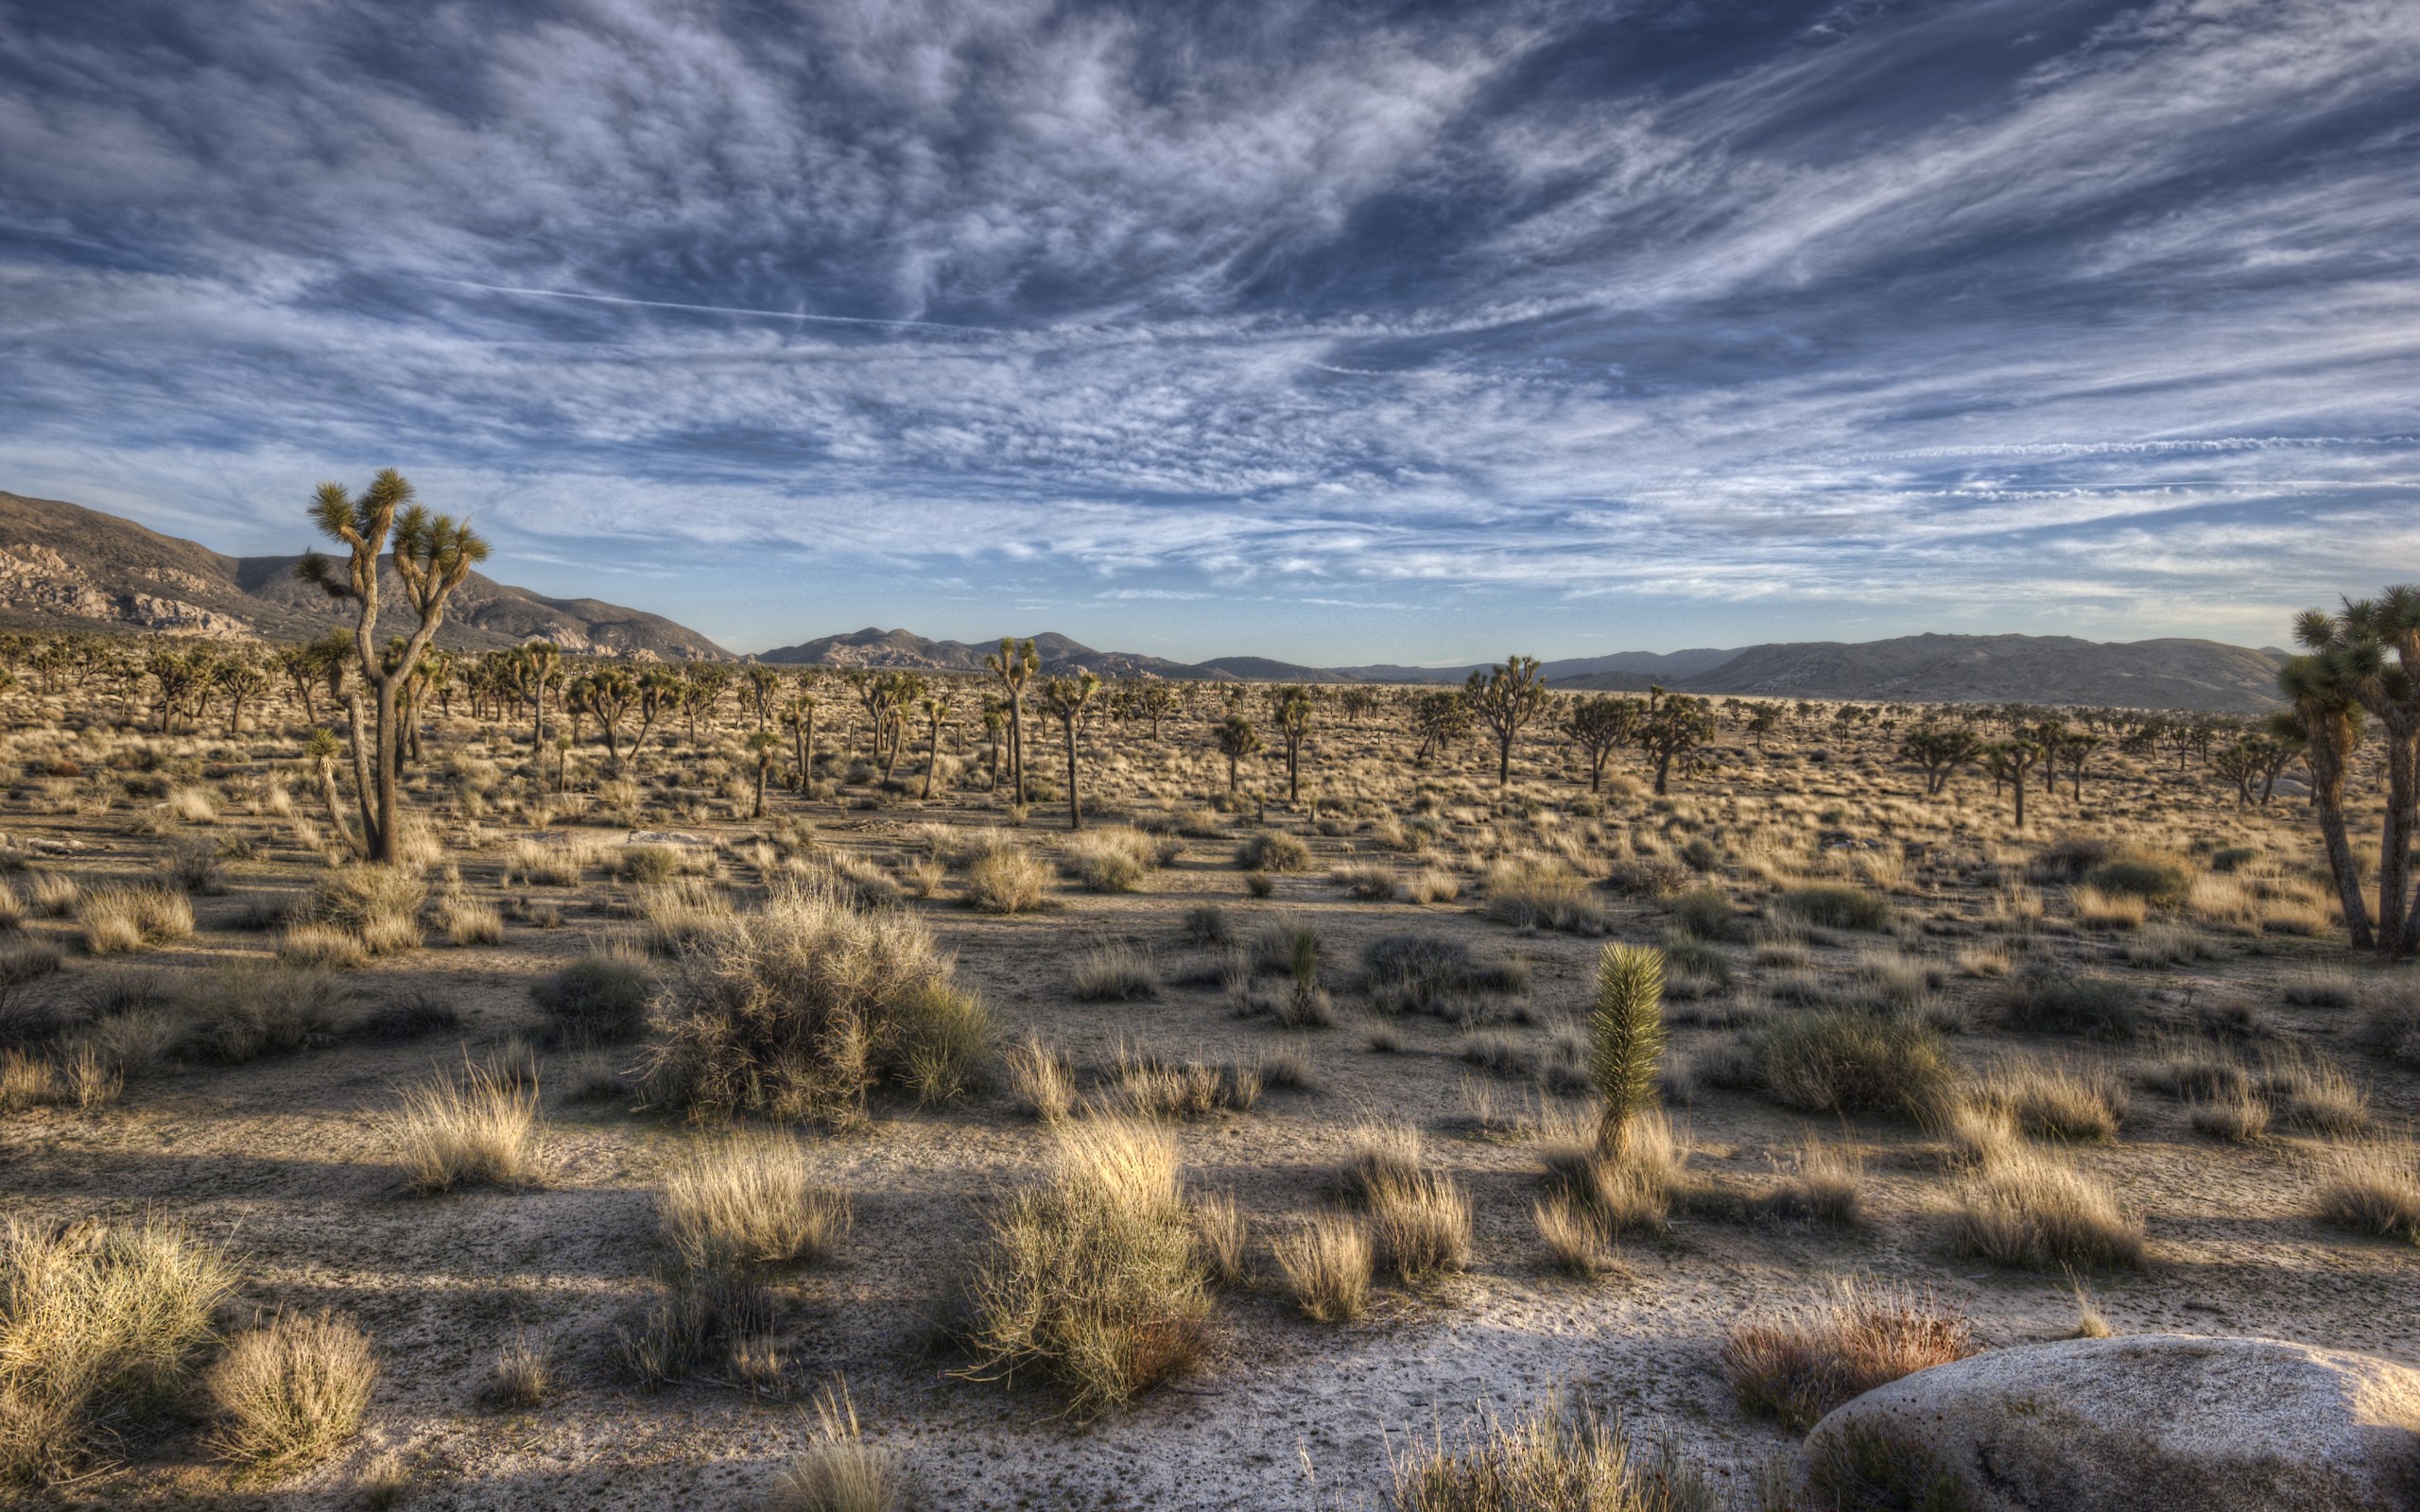 General 2560x1600 nature landscape HDR sky desert clouds outdoors